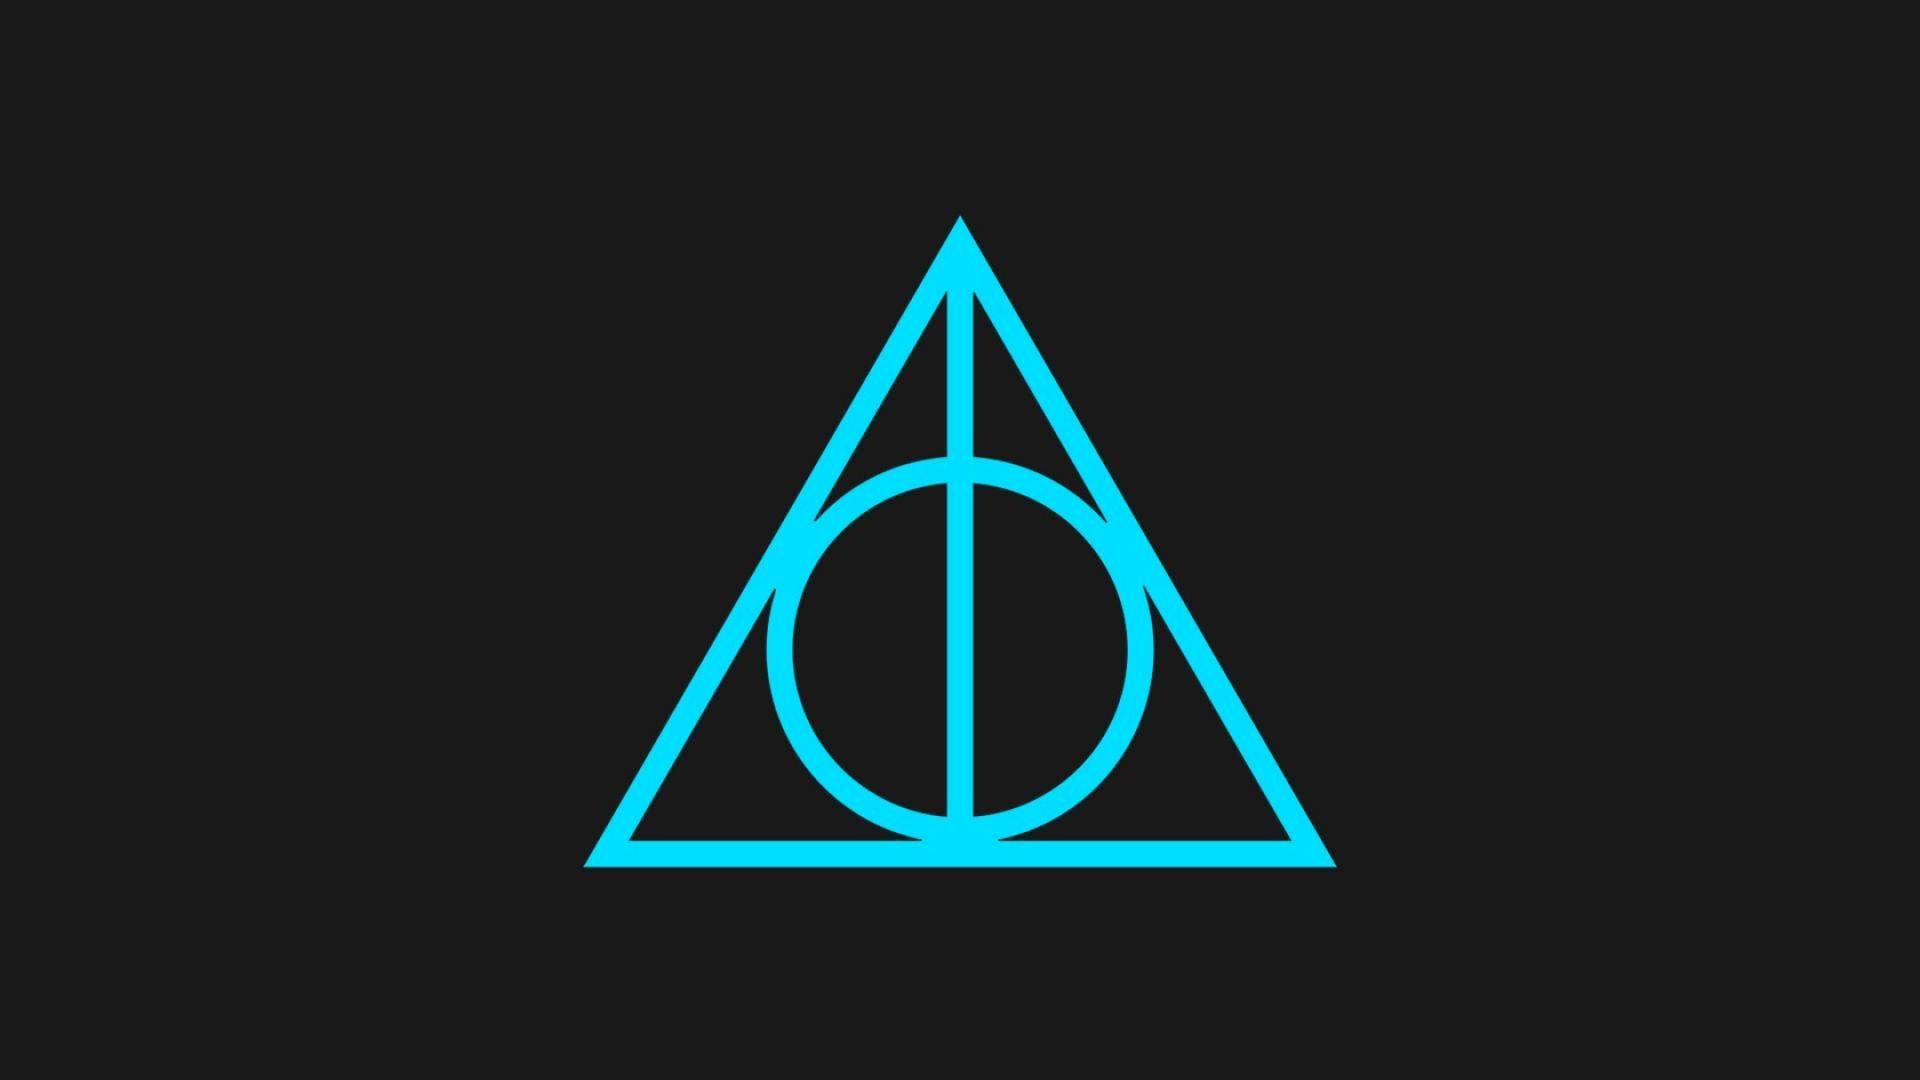 Minimalistic harry potter and the deathly hallows symbols wallpapers